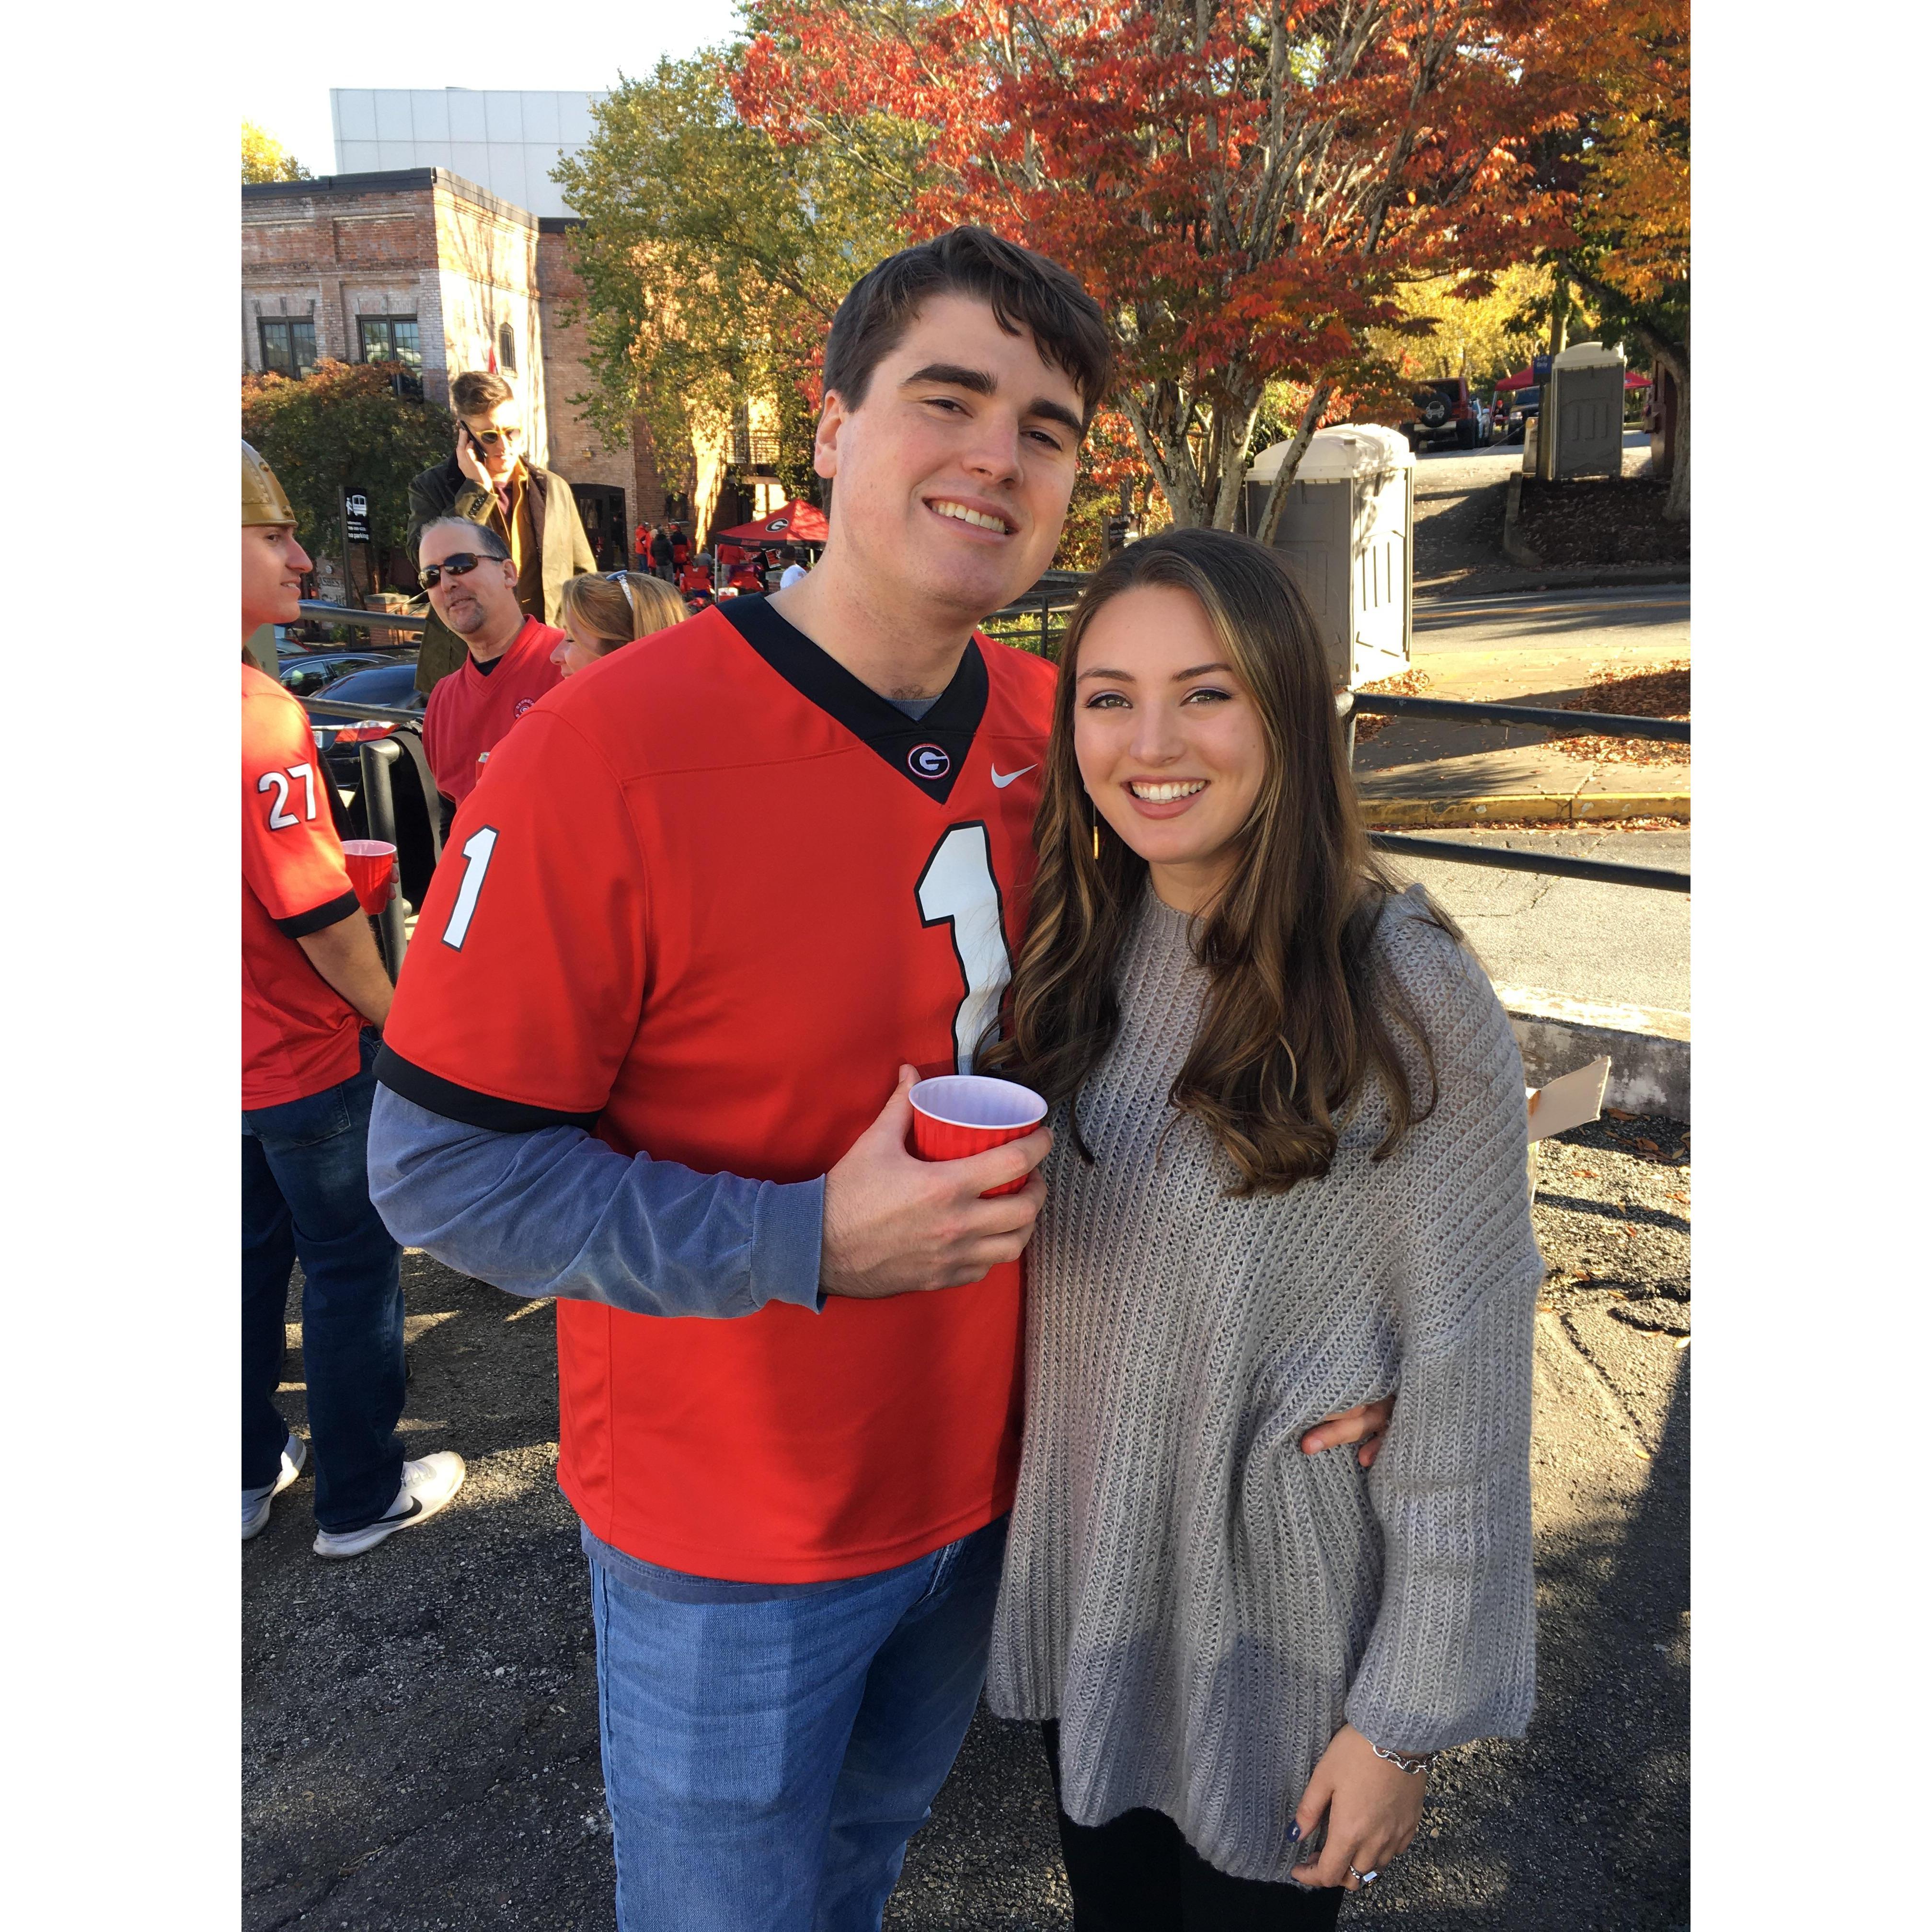 The day before David proposed! (go dawgs!)